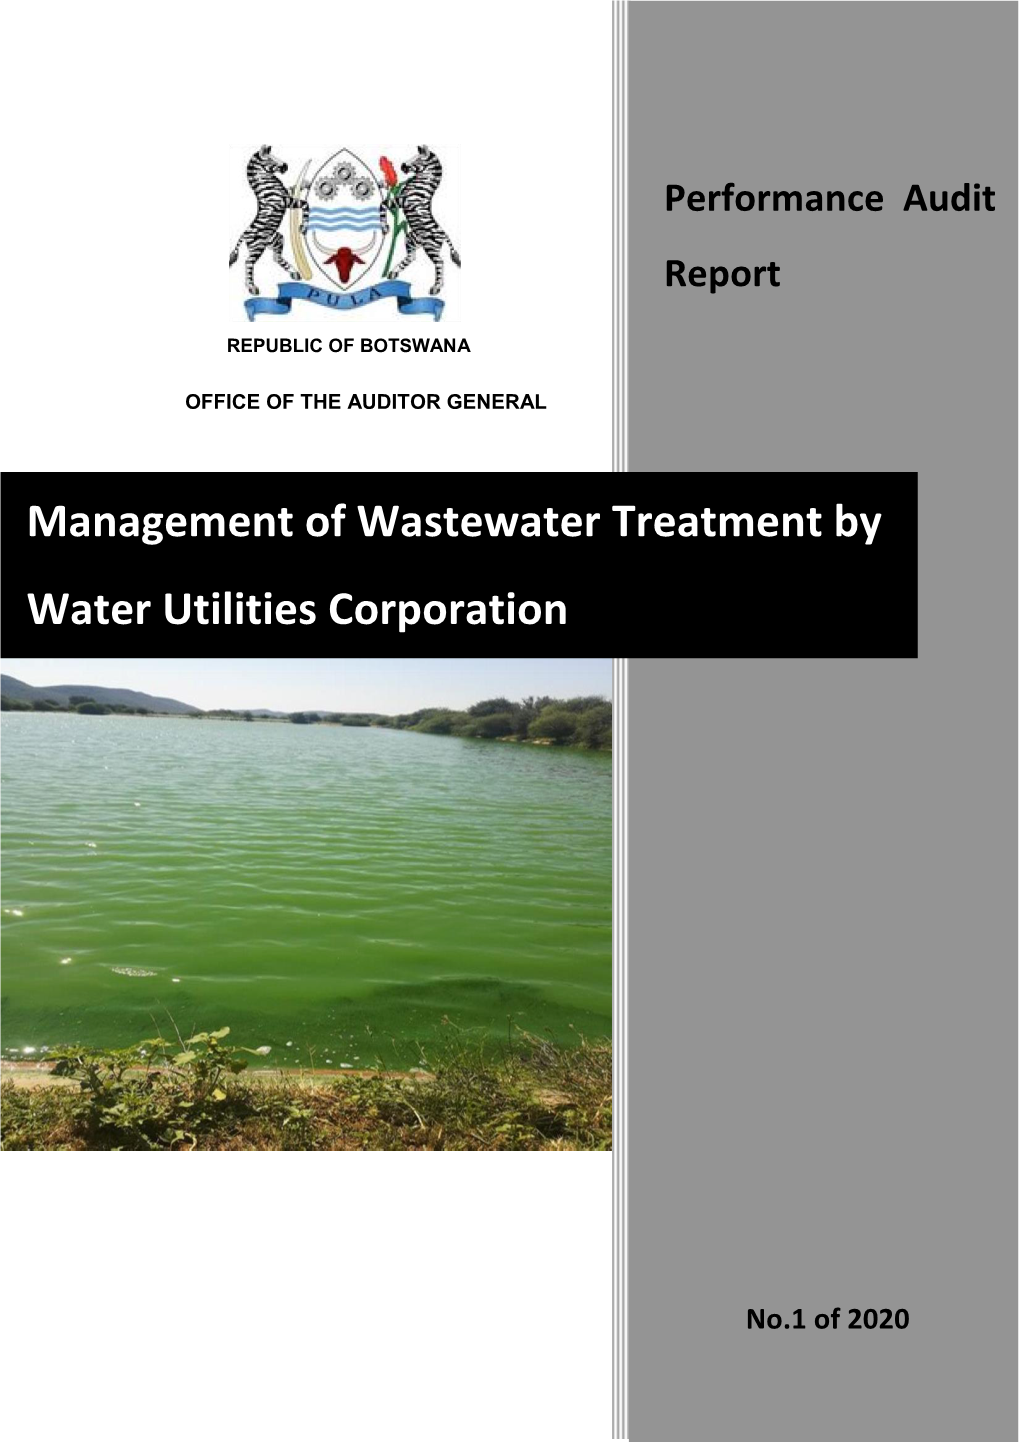 Management of Wastewater Treatment by Water Utilities